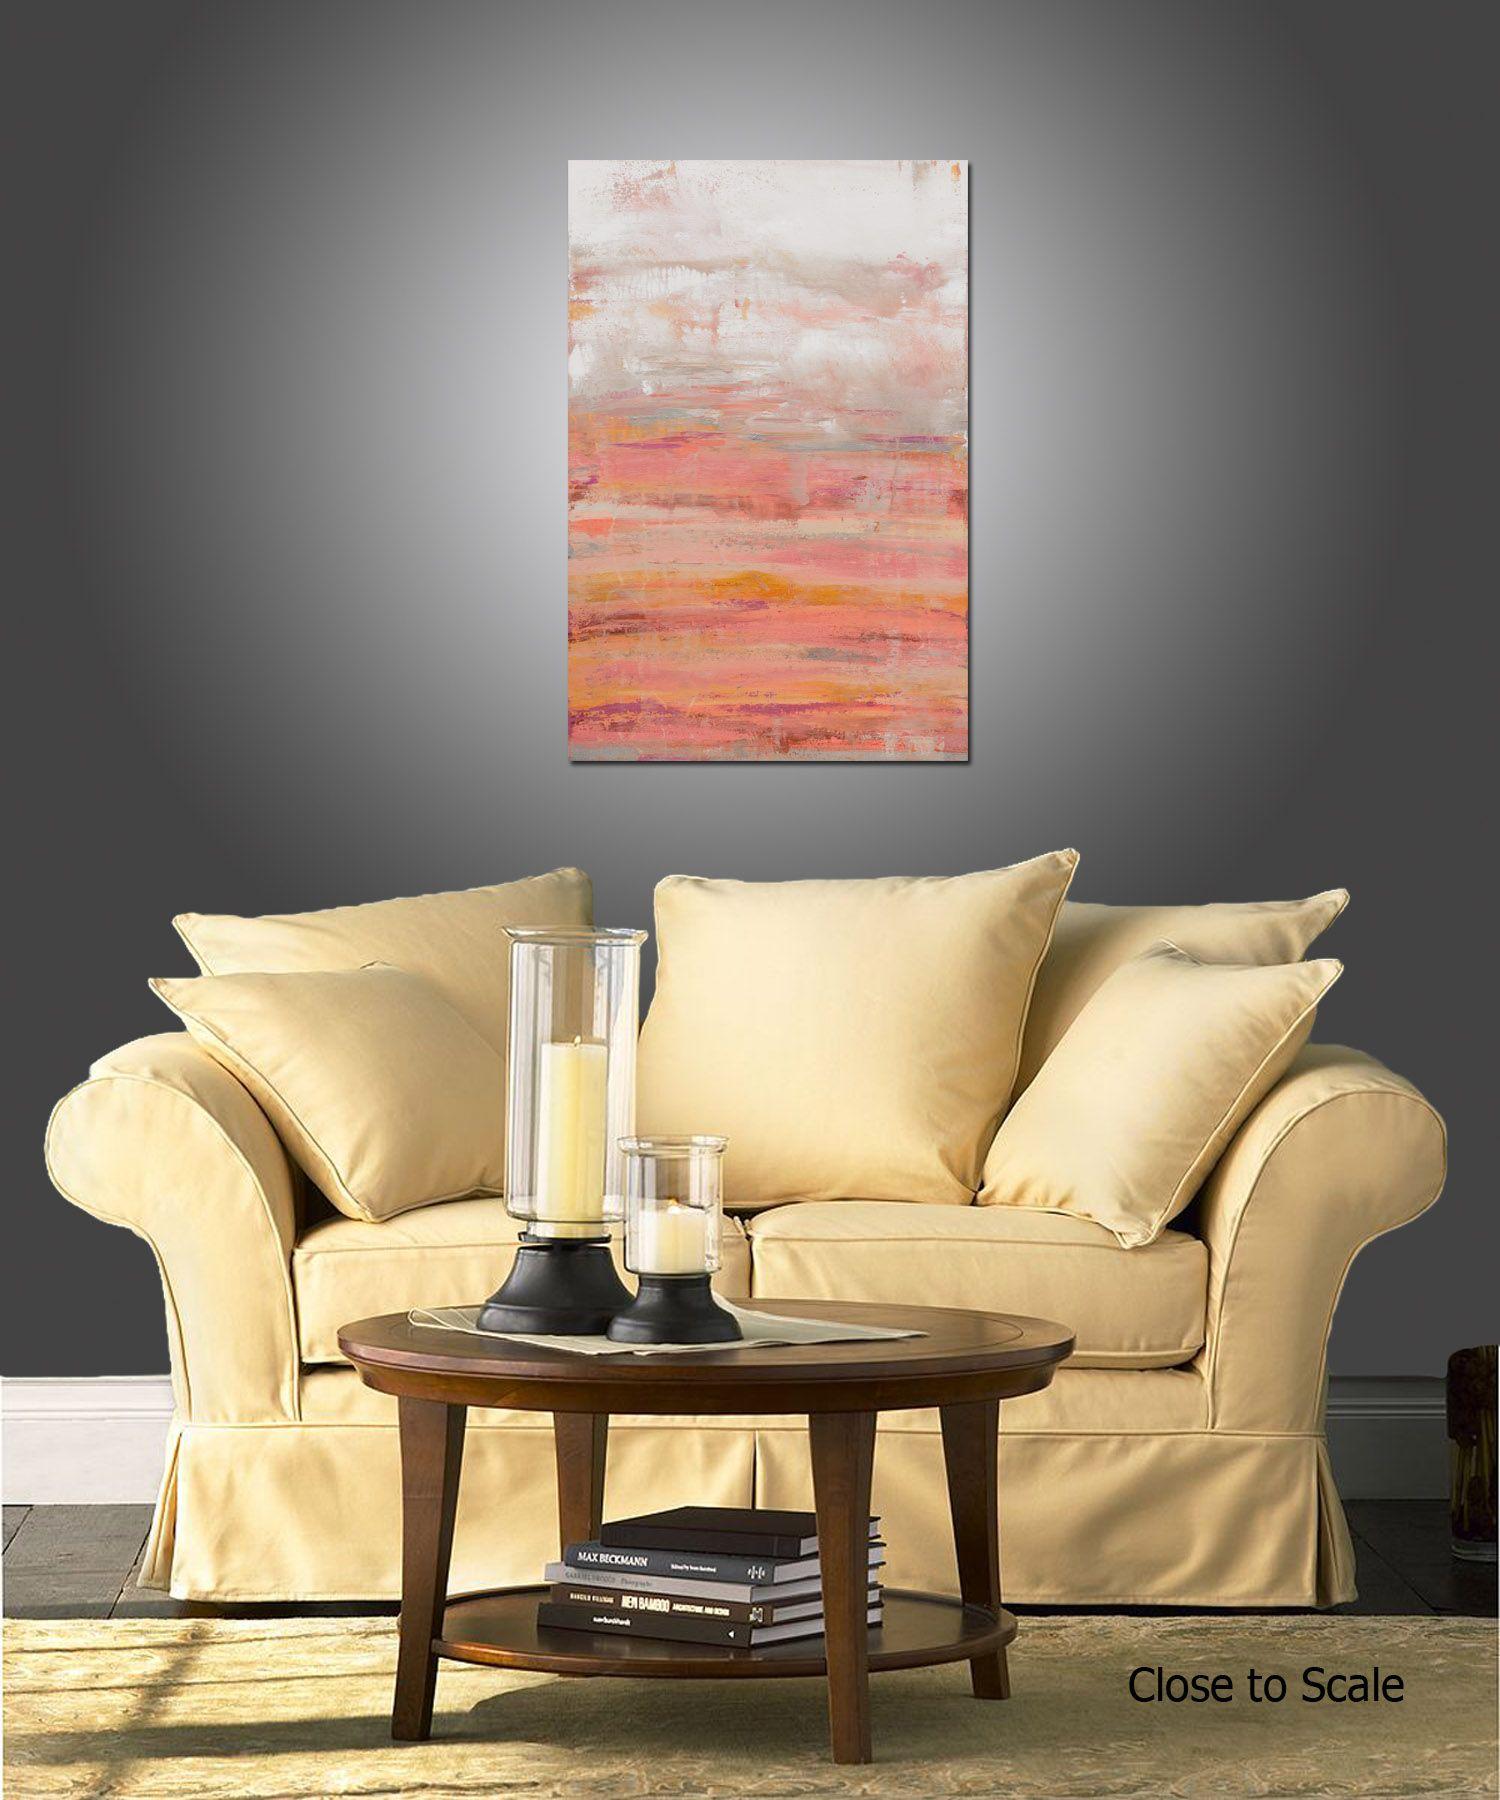 Lithosphere 180 is an original painting, created with acrylic paint on gallery-wrapped canvas. It has a width of 24 inches and a height of 36 inches with a depth of 1.5 inches (24x36x1.5).     The colors used in the painting are pink, white,